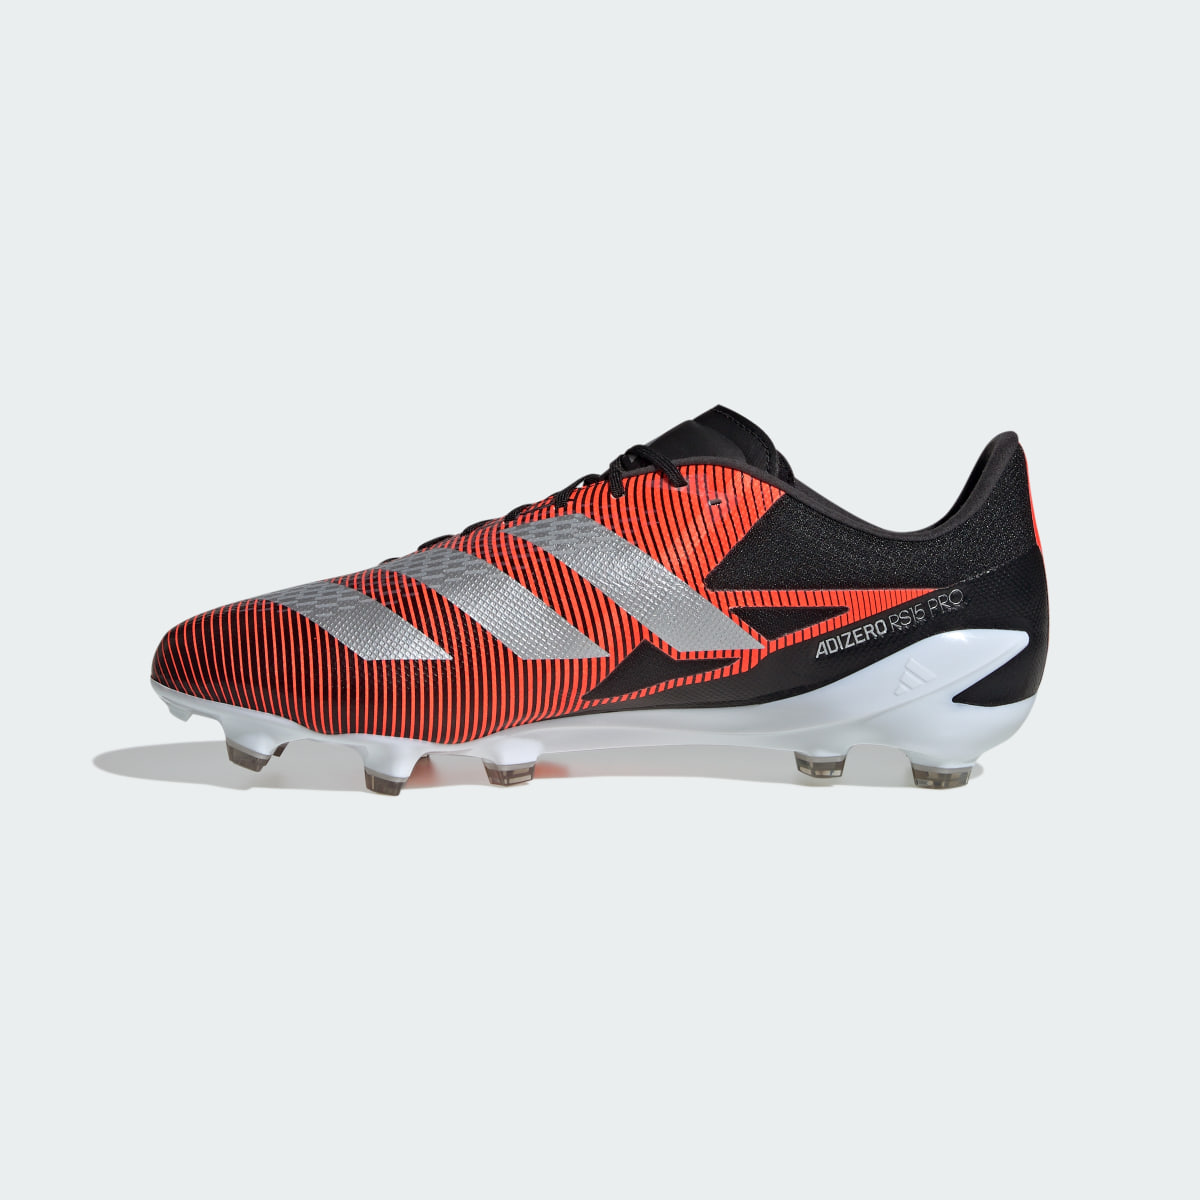 Adidas Adizero RS15 Pro Firm Ground Rugby Boots. 11